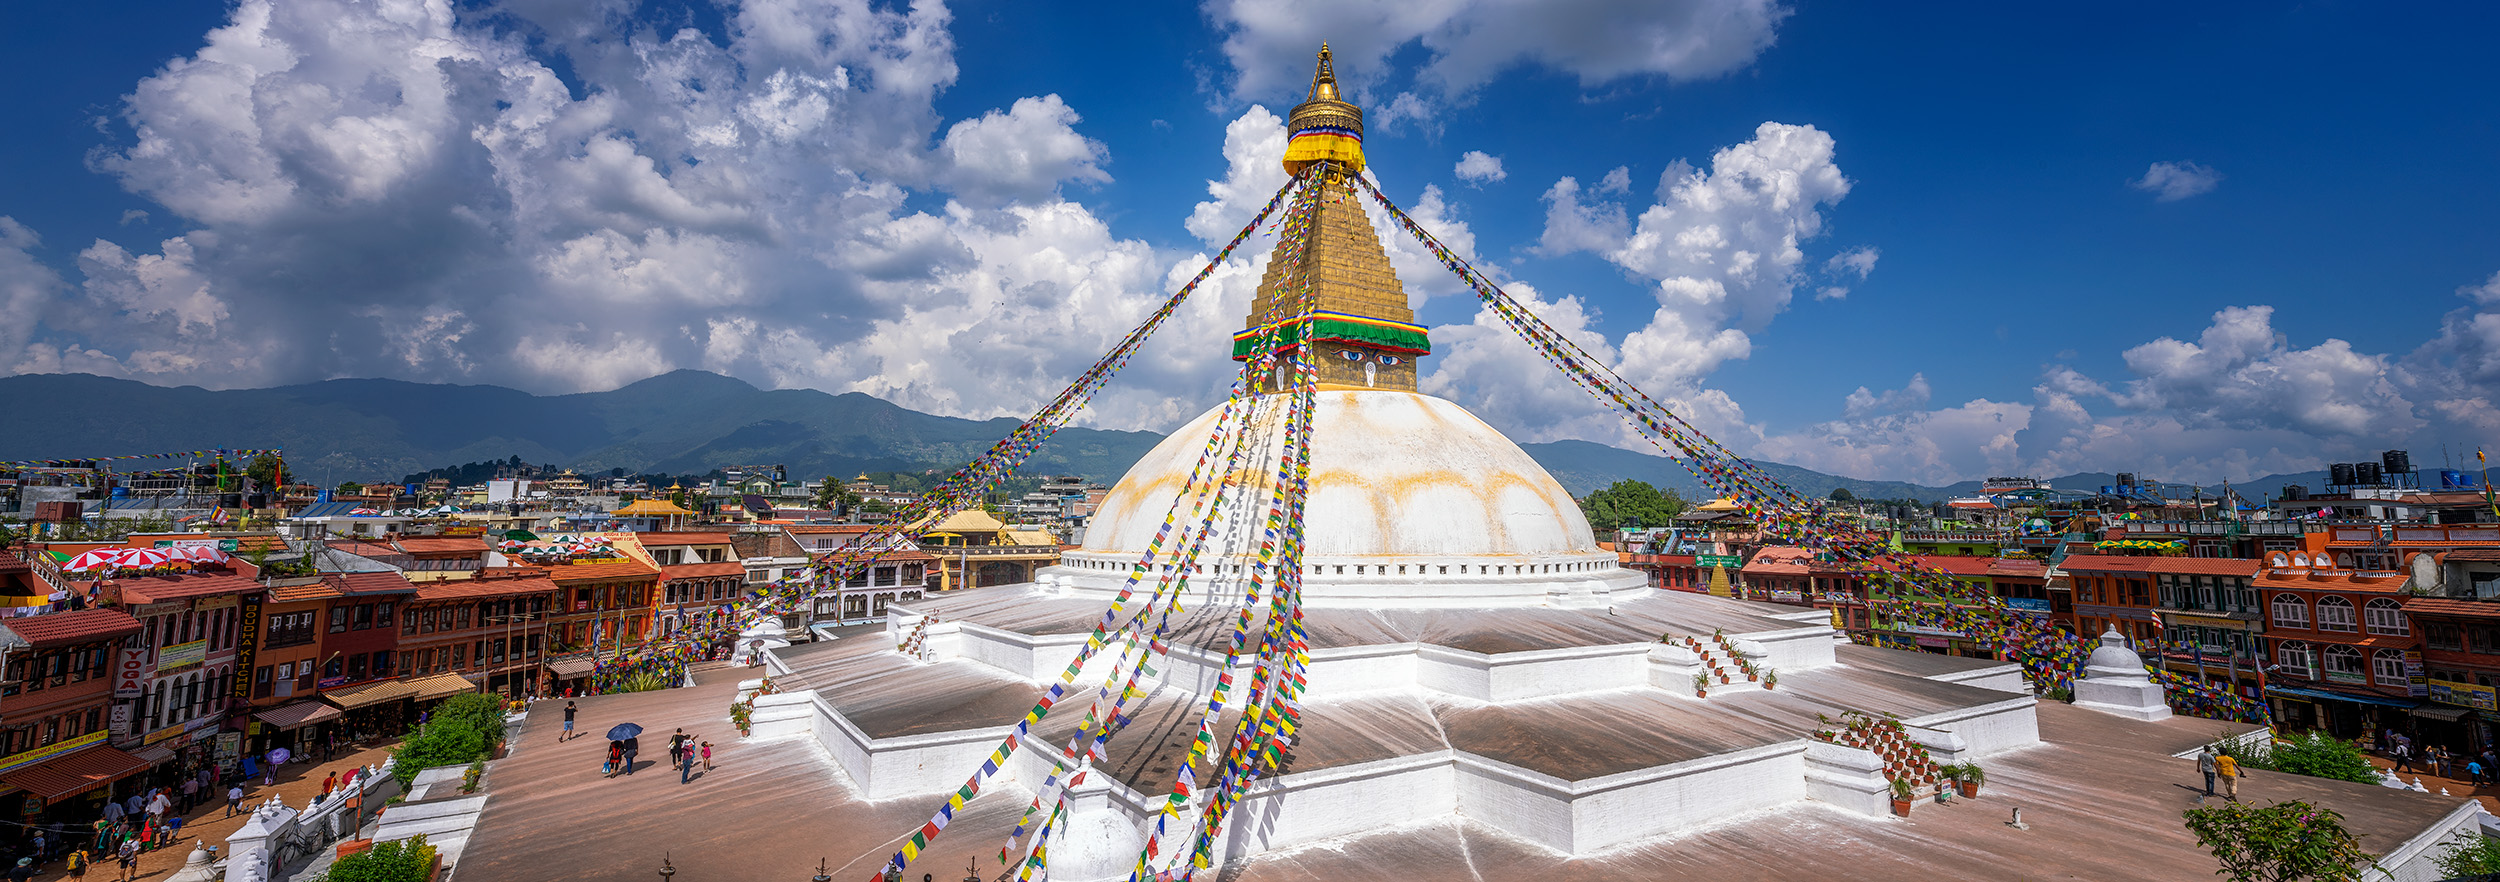 "Bouddhanath Unveiled" offers a sweeping 6x17 panoramic view of Kathmandu's Bouddhanath Temple and its vibrant surroundings....